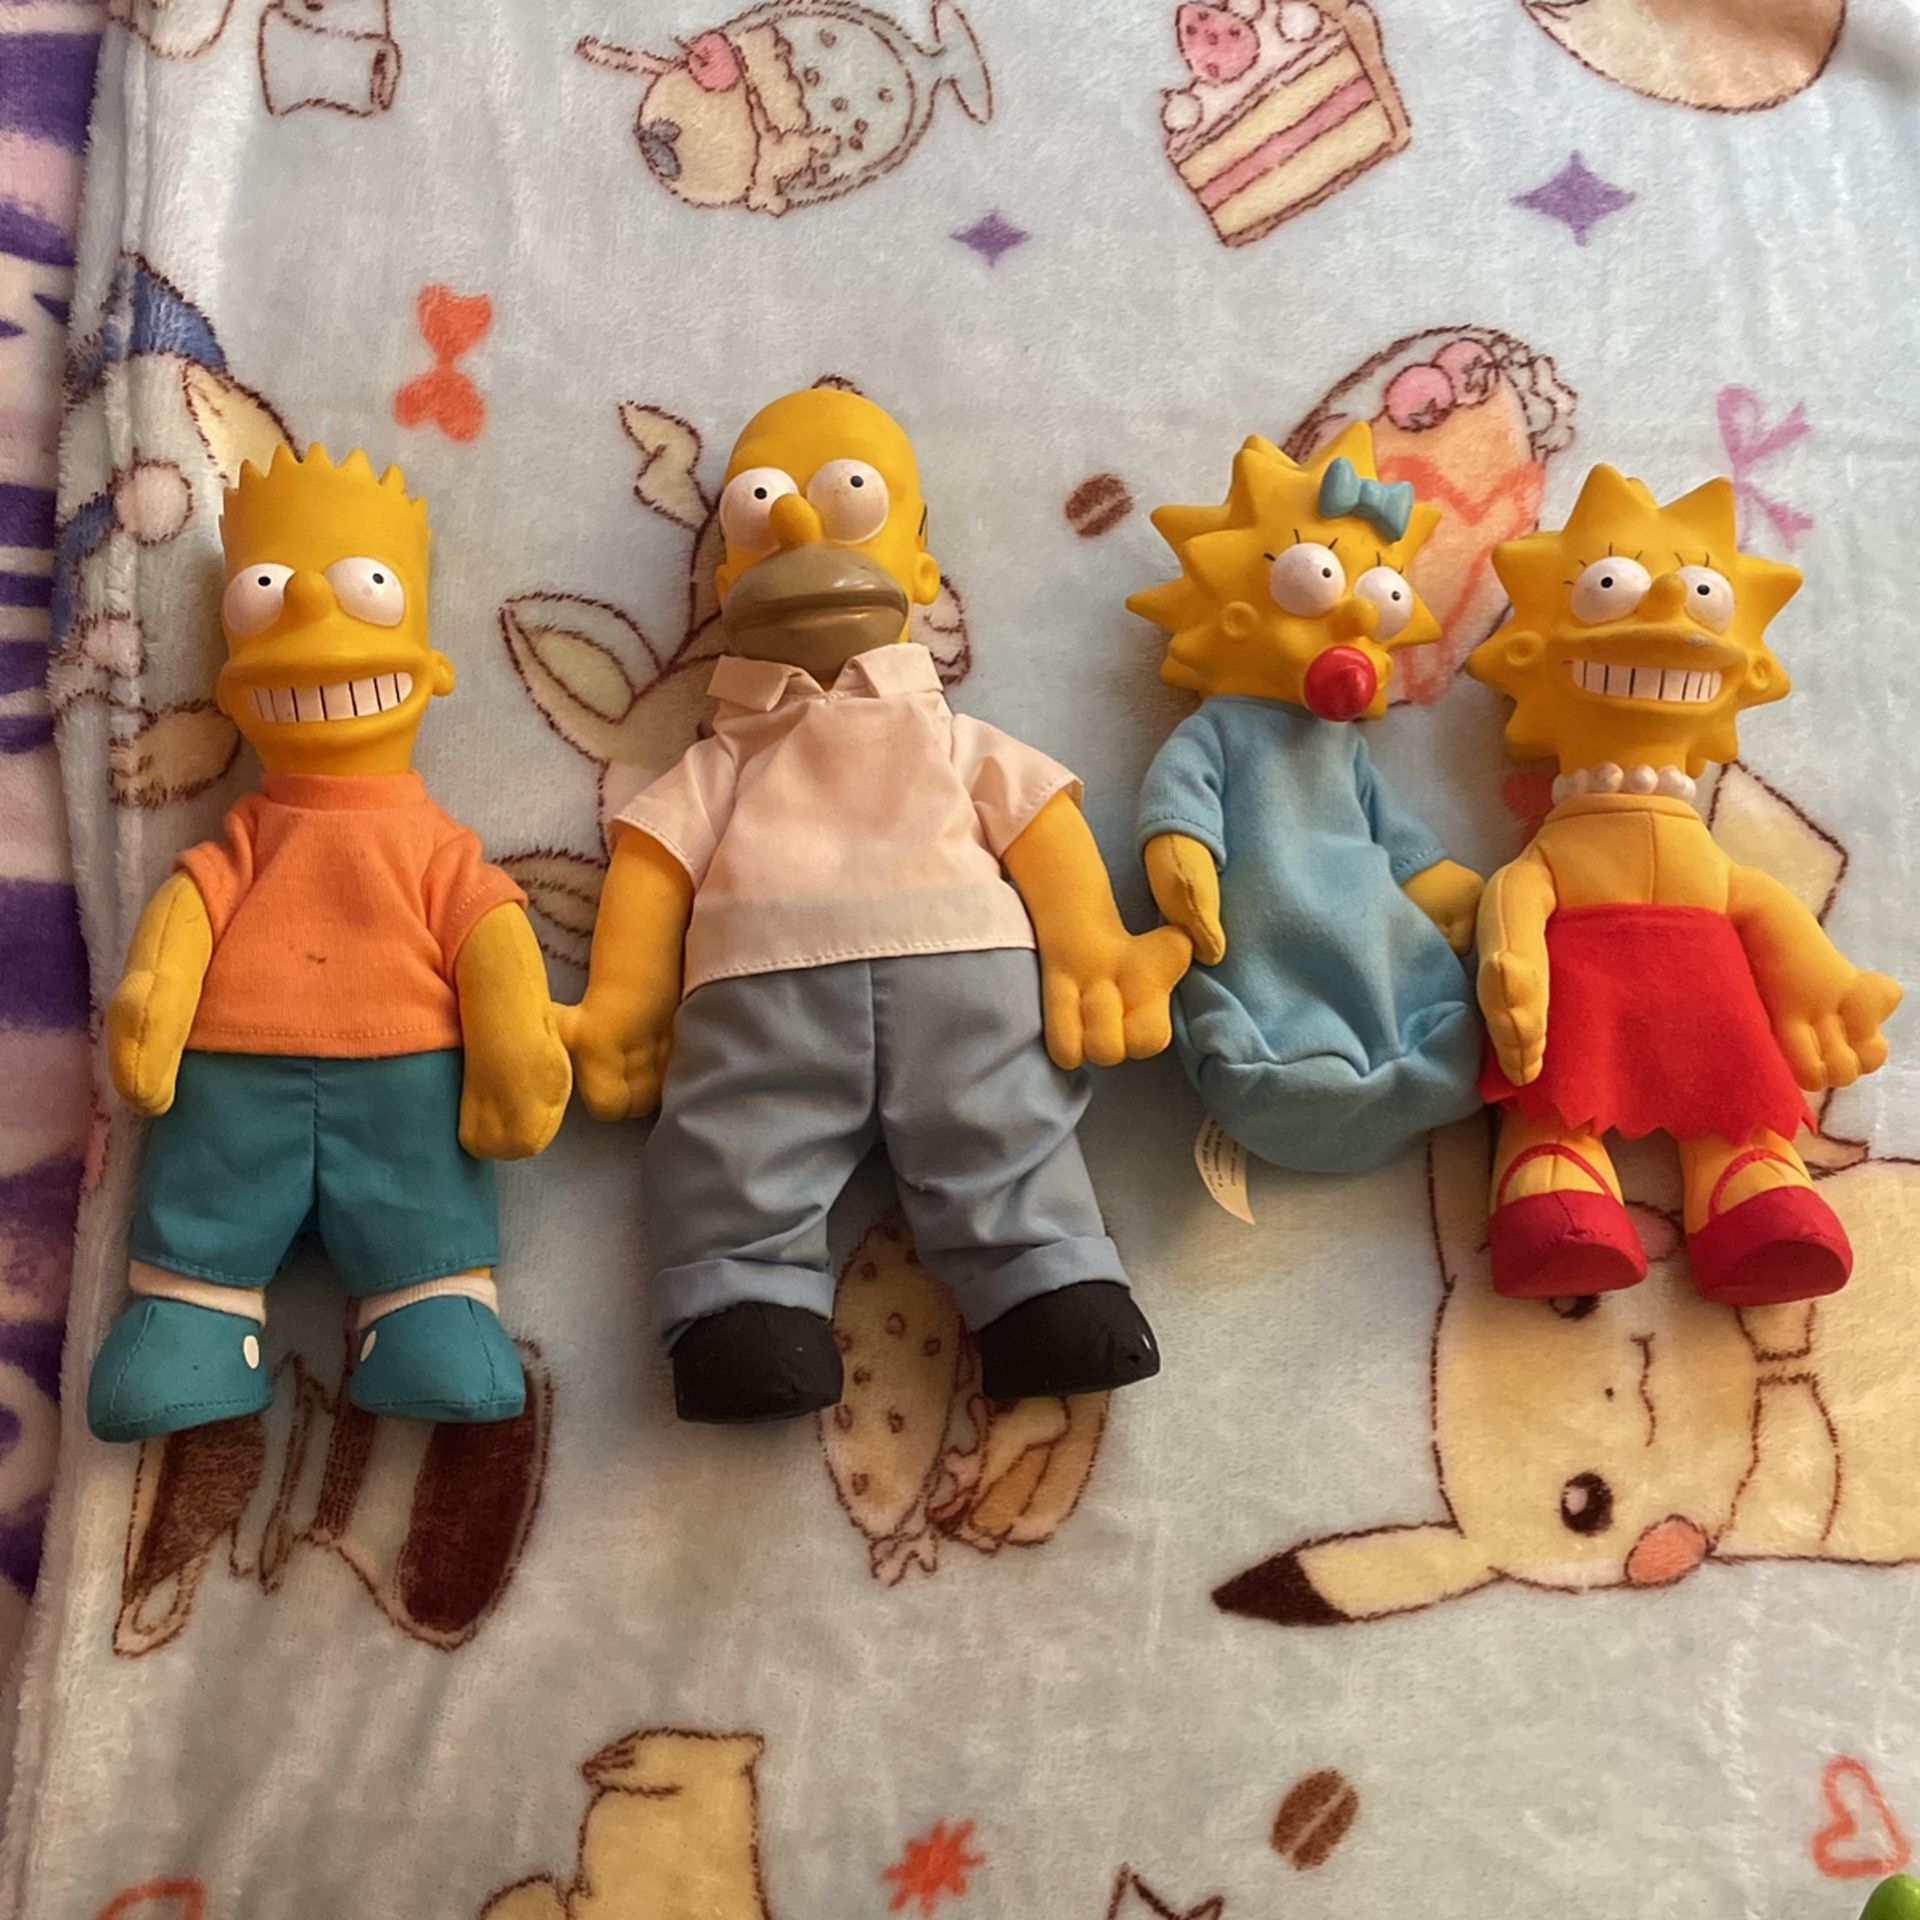 Full old simpsons toy lot!